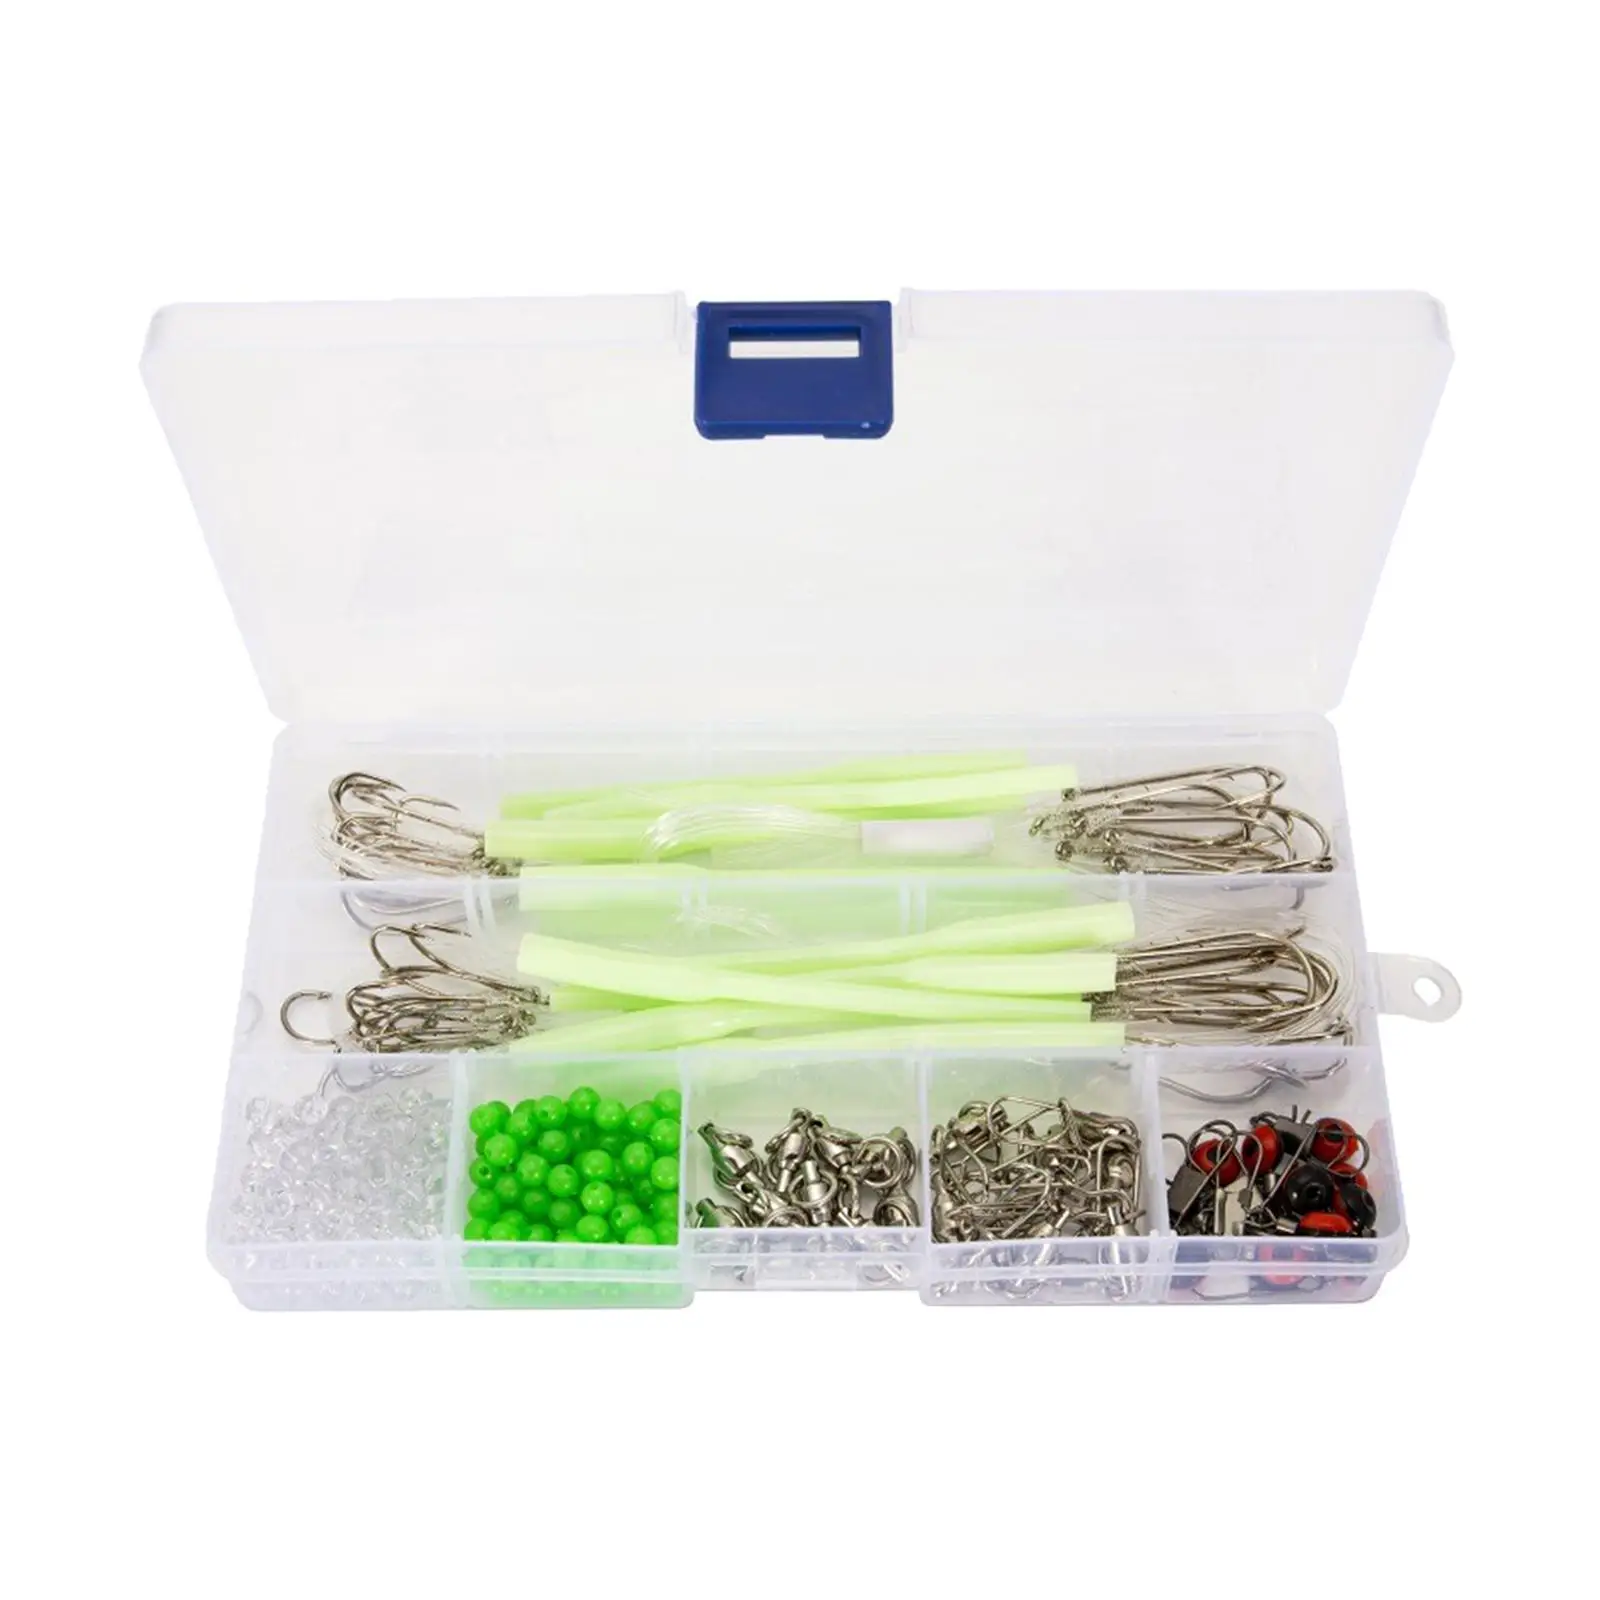 289x Fishing Tackle Box Kit with Box Thread Hook Set Bearing Swivel Fishing Accessories for Boat Fishing Freshwater